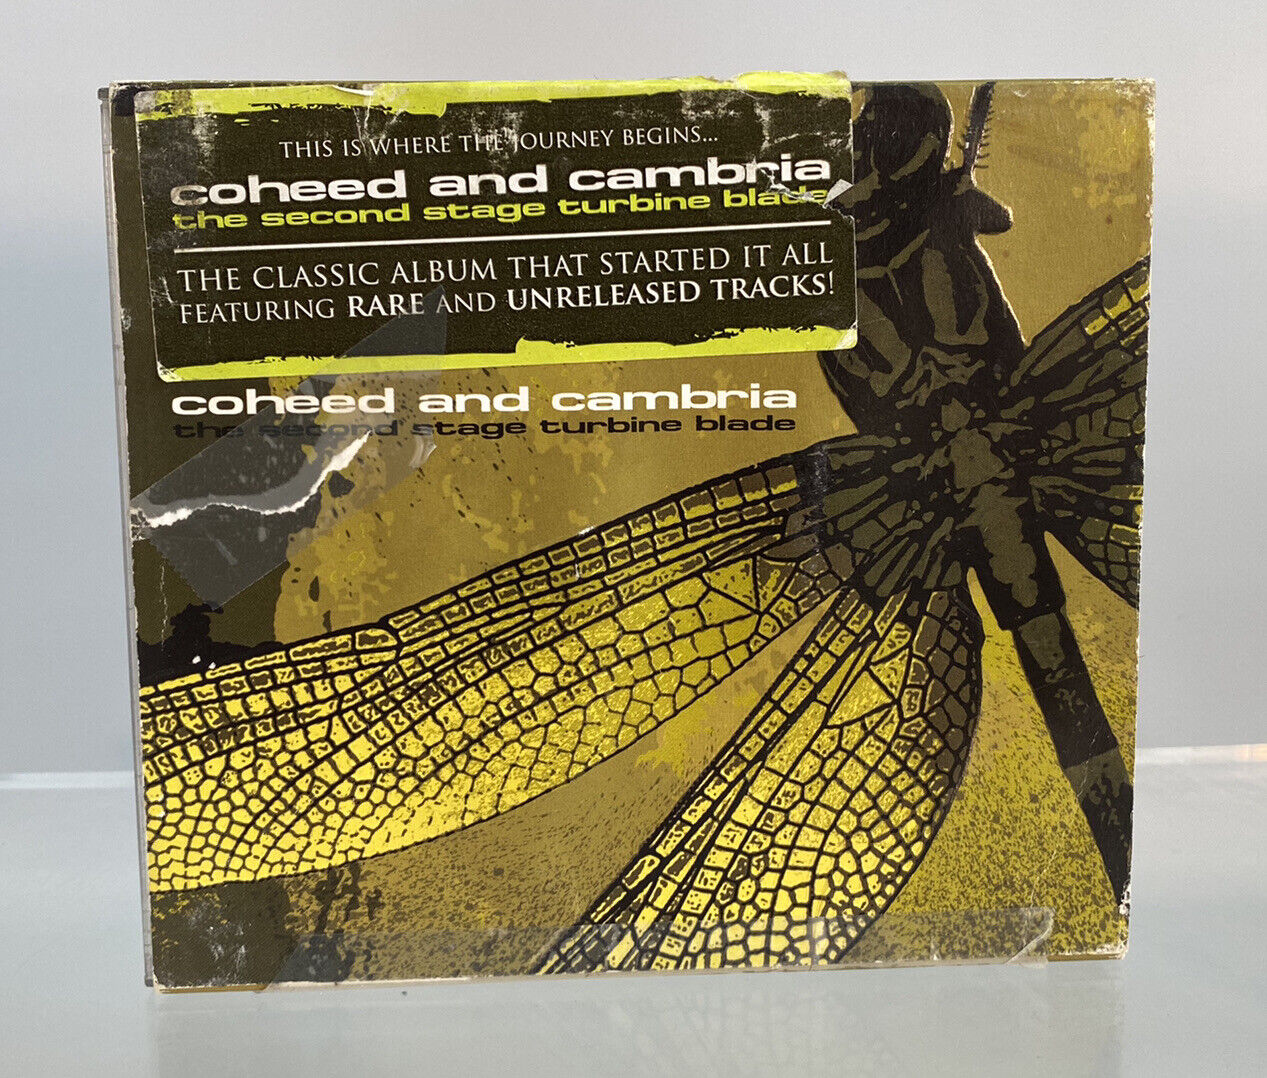 Vintage 2001 2005 Coheed & Cambria Second Stage Turbine Blade CD EVR114 Sleeve